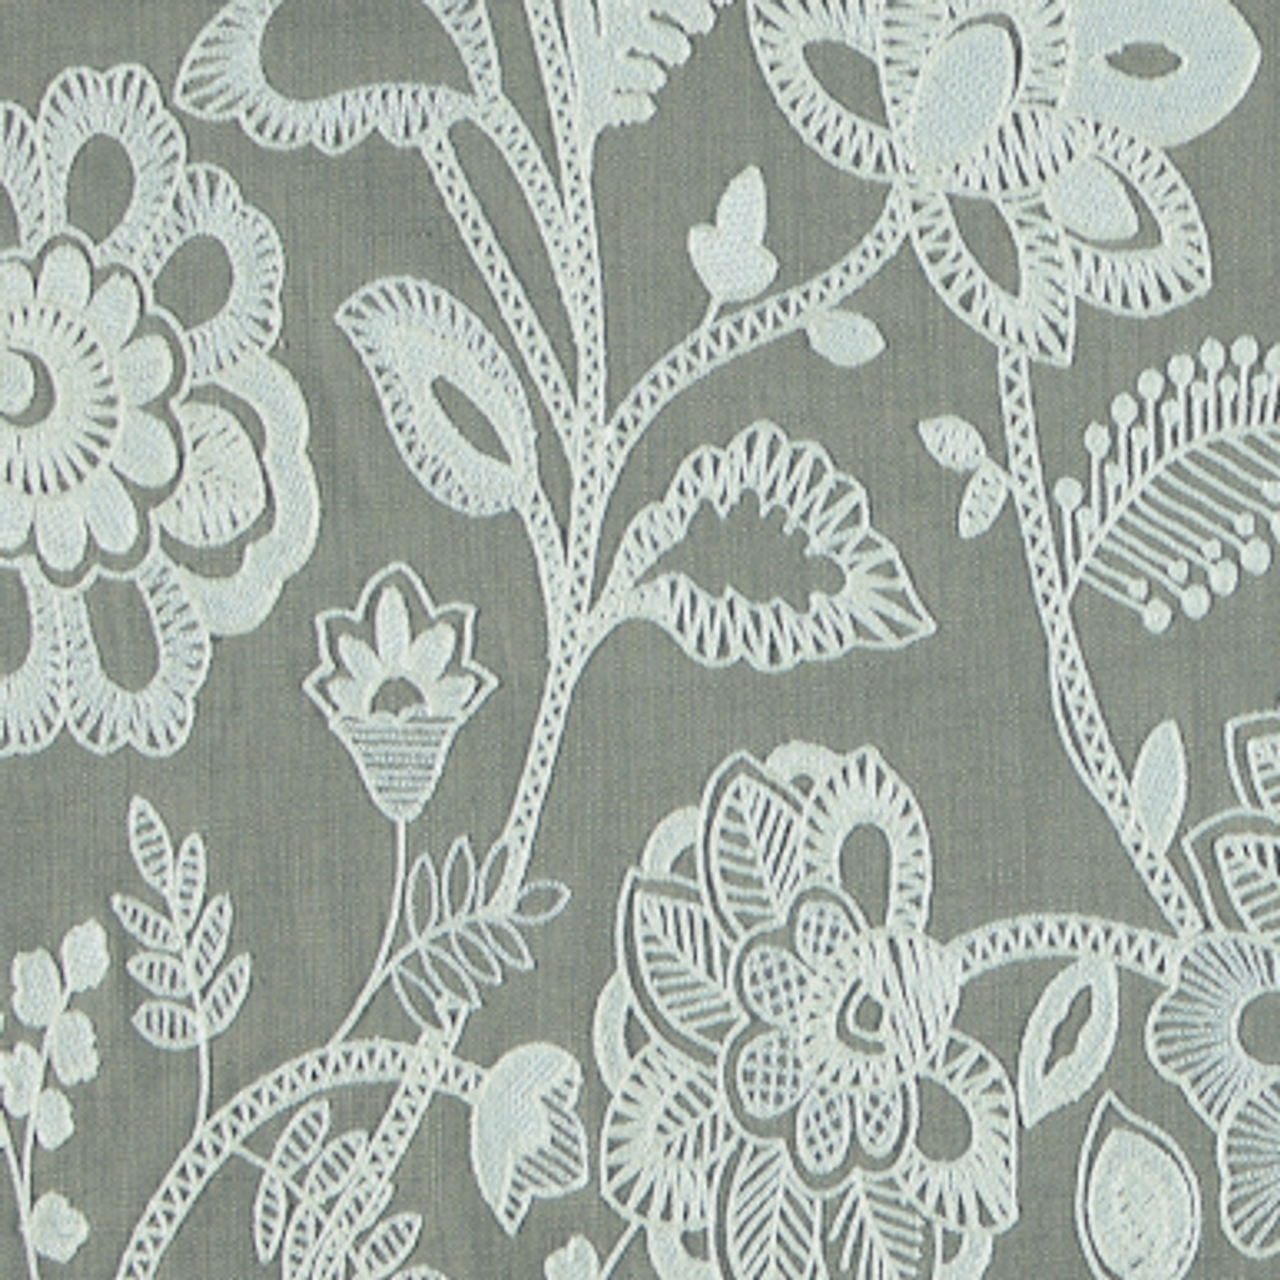 Blush Beige and Gray Floral Embroidery Upholstery Fabric by the